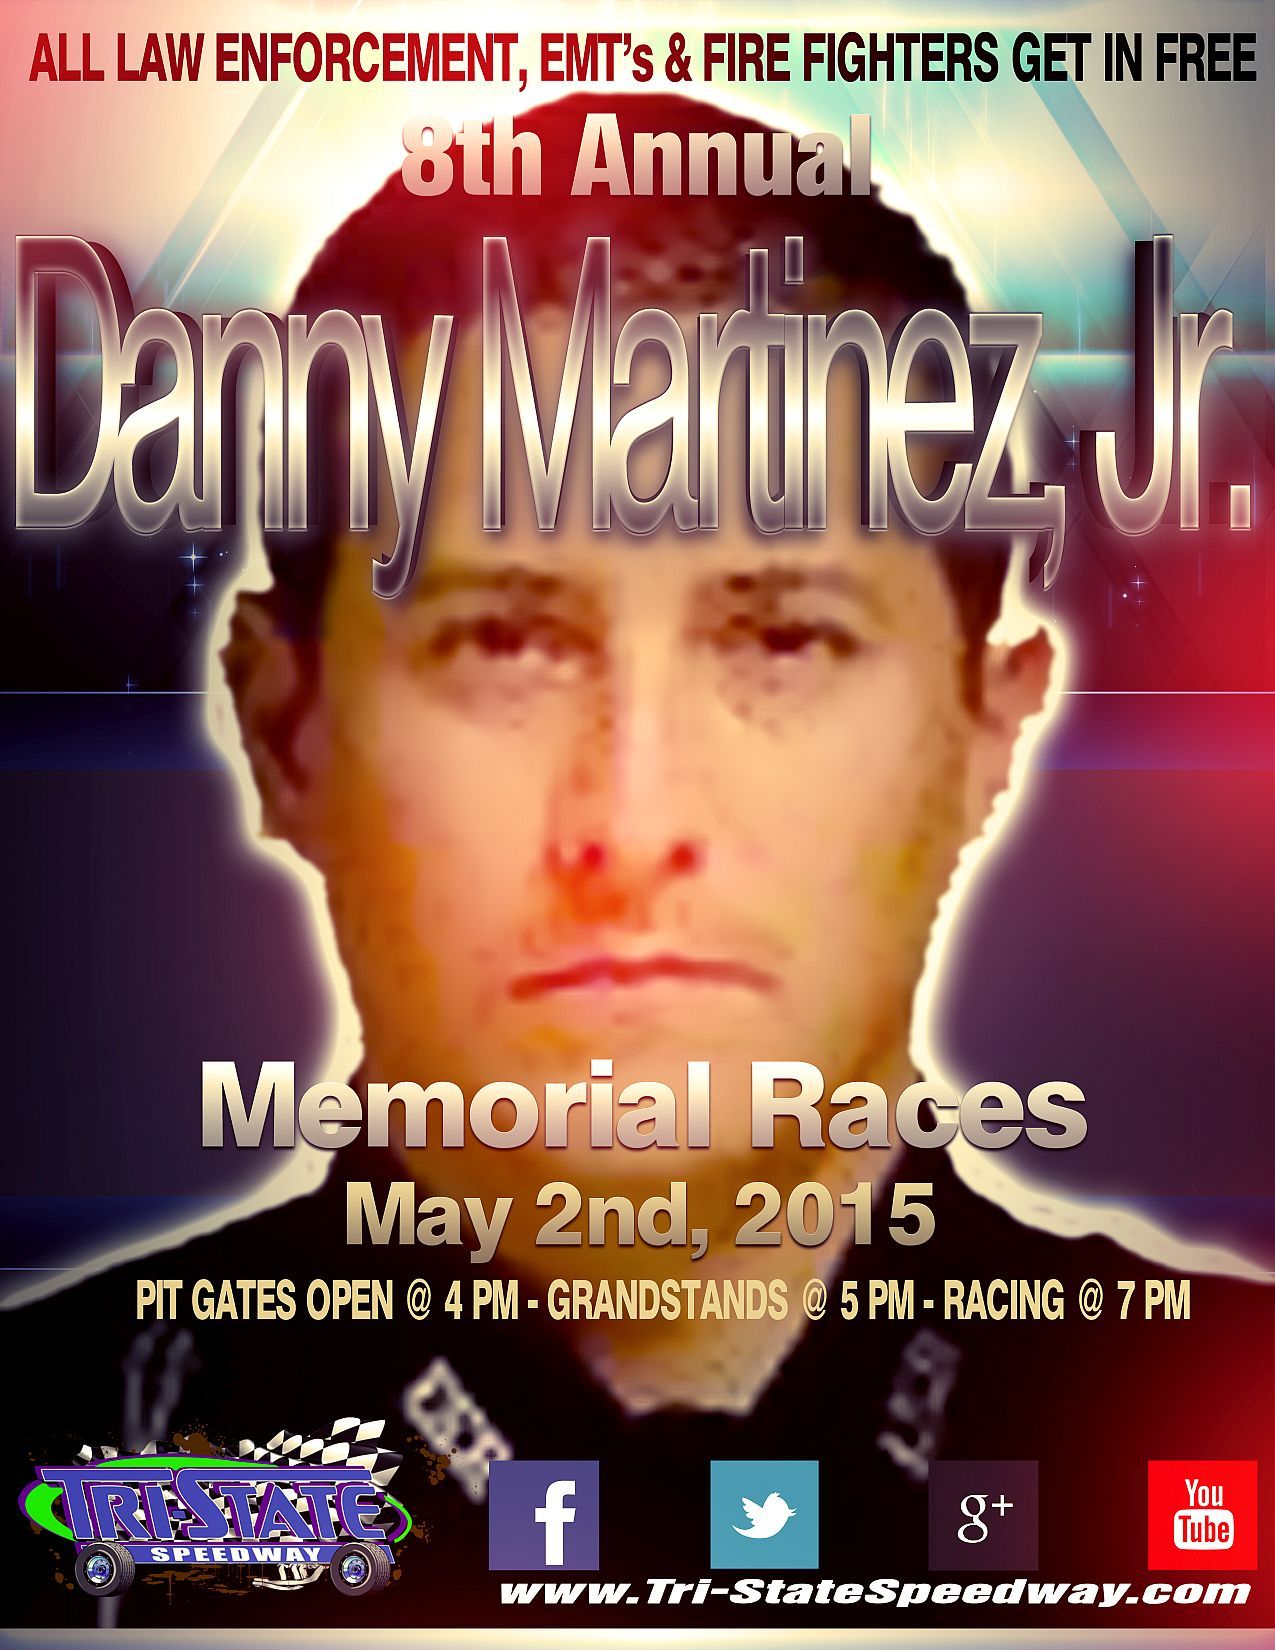 8th Annual Danny Martinez, Jr. Memorial Races and Law Enforcement, EMT and Firefighters Night